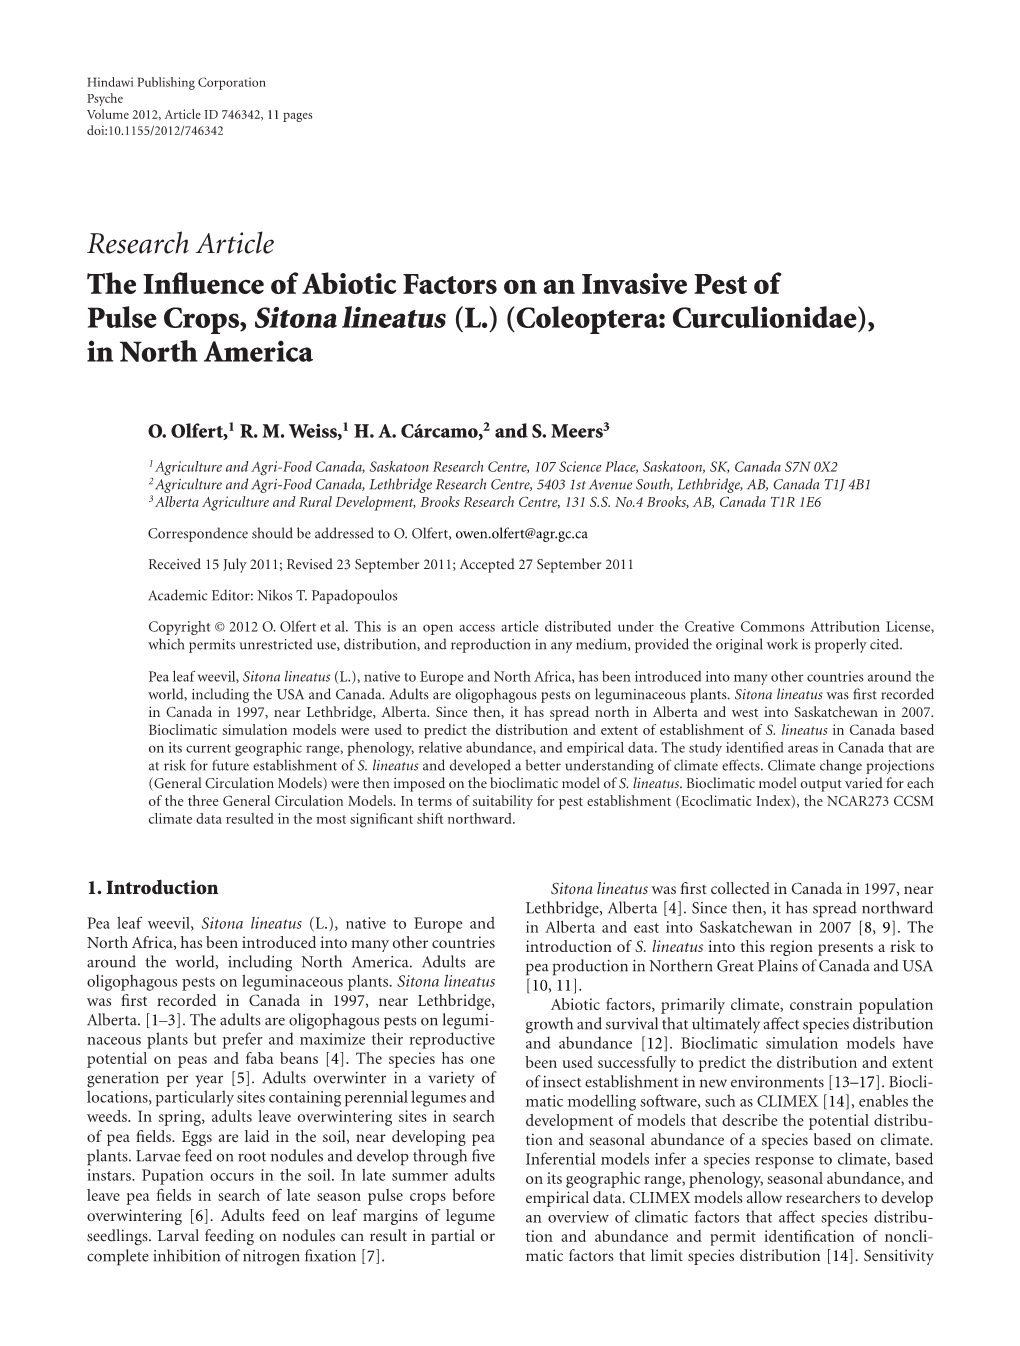 Research Article the Influence of Abiotic Factors On